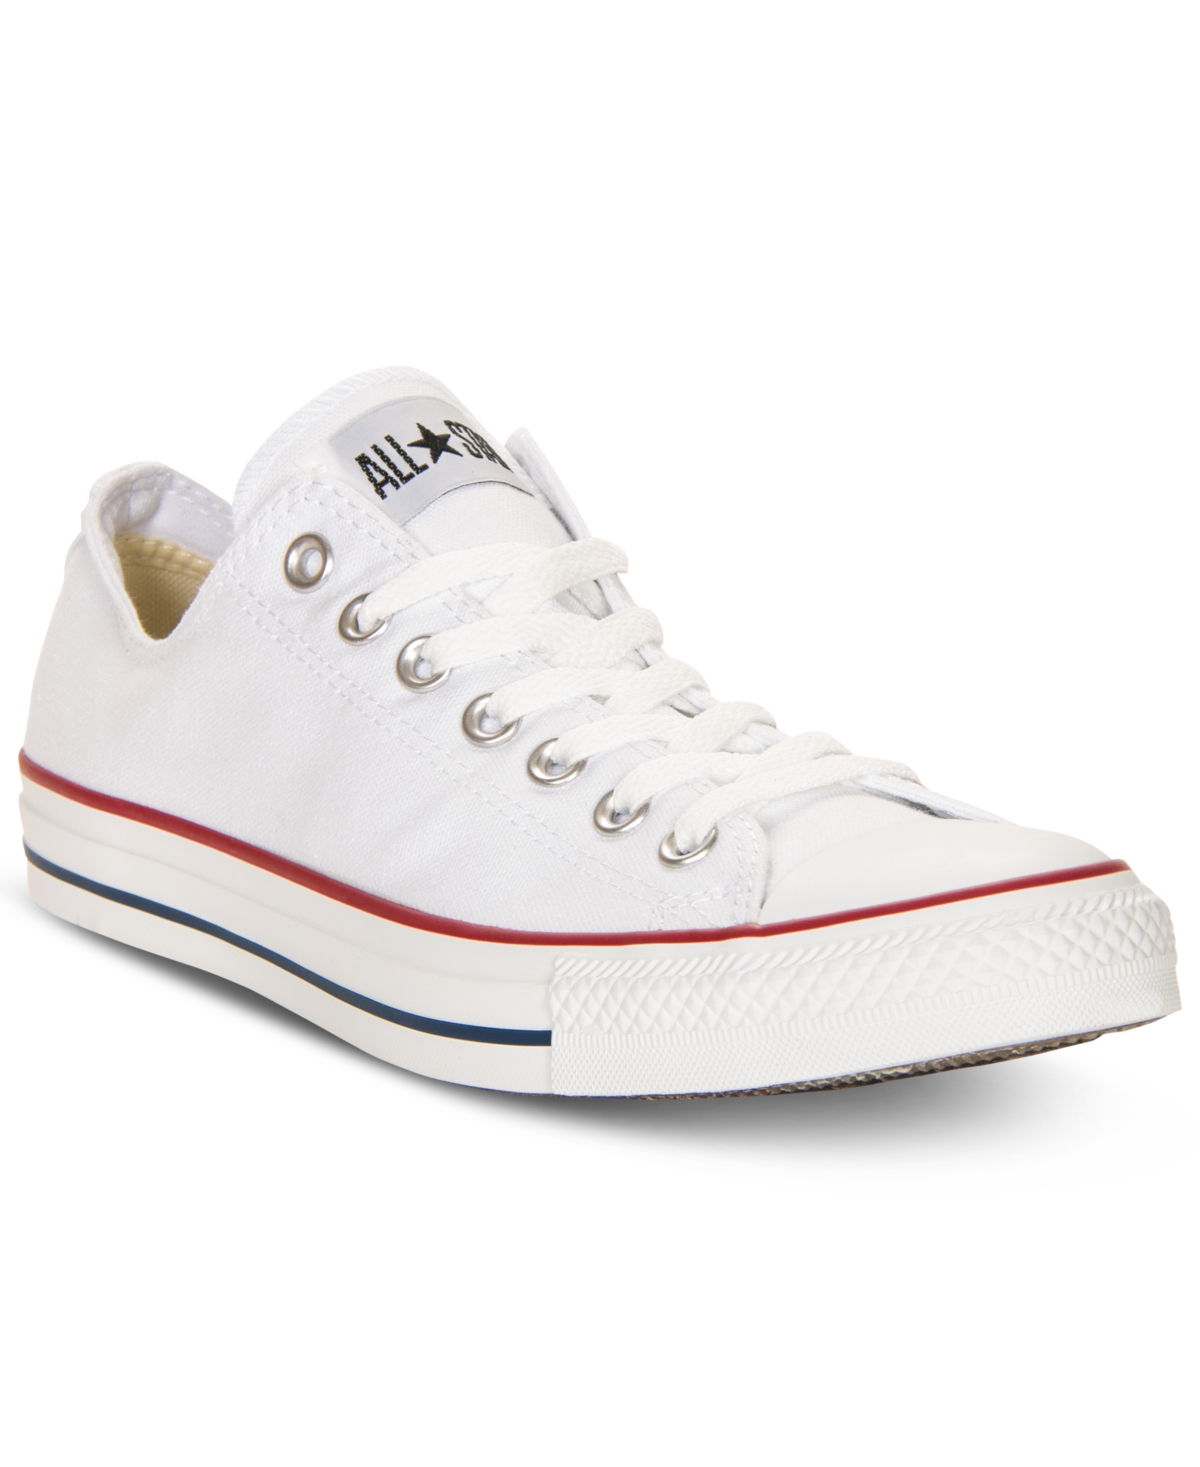 UPC 022859283182 product image for Converse Men's Chuck Taylor Low Top Sneakers from Finish Line | upcitemdb.com